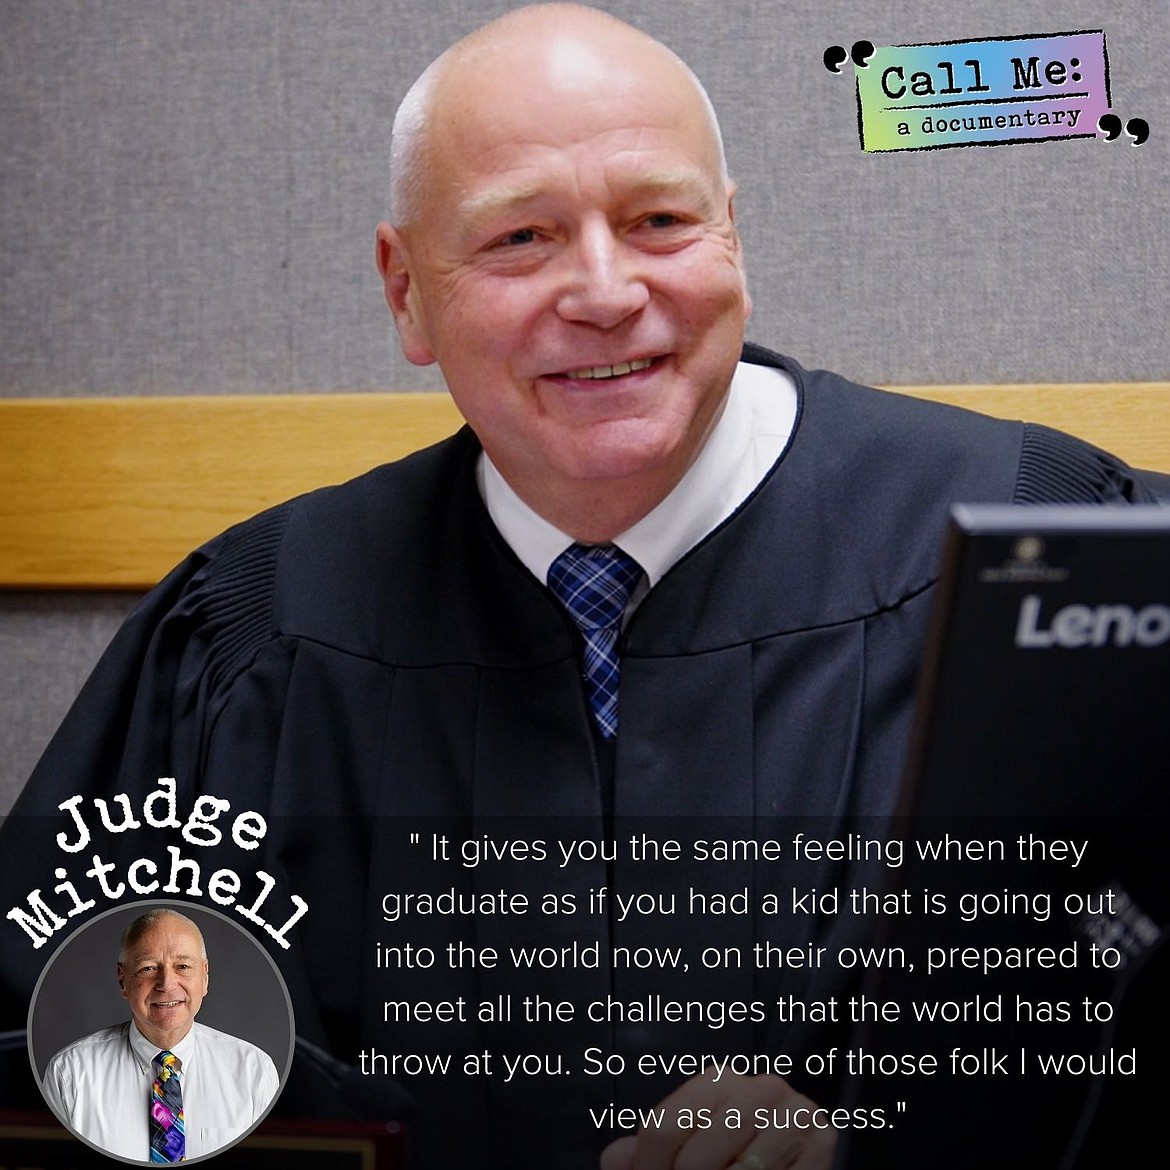 Mental health court Judge John Mitchell appears in Panhandle Health District's "Call Me: Stories from North Idaho," a documentary that raises awareness about substance abuse and drug use in the region.